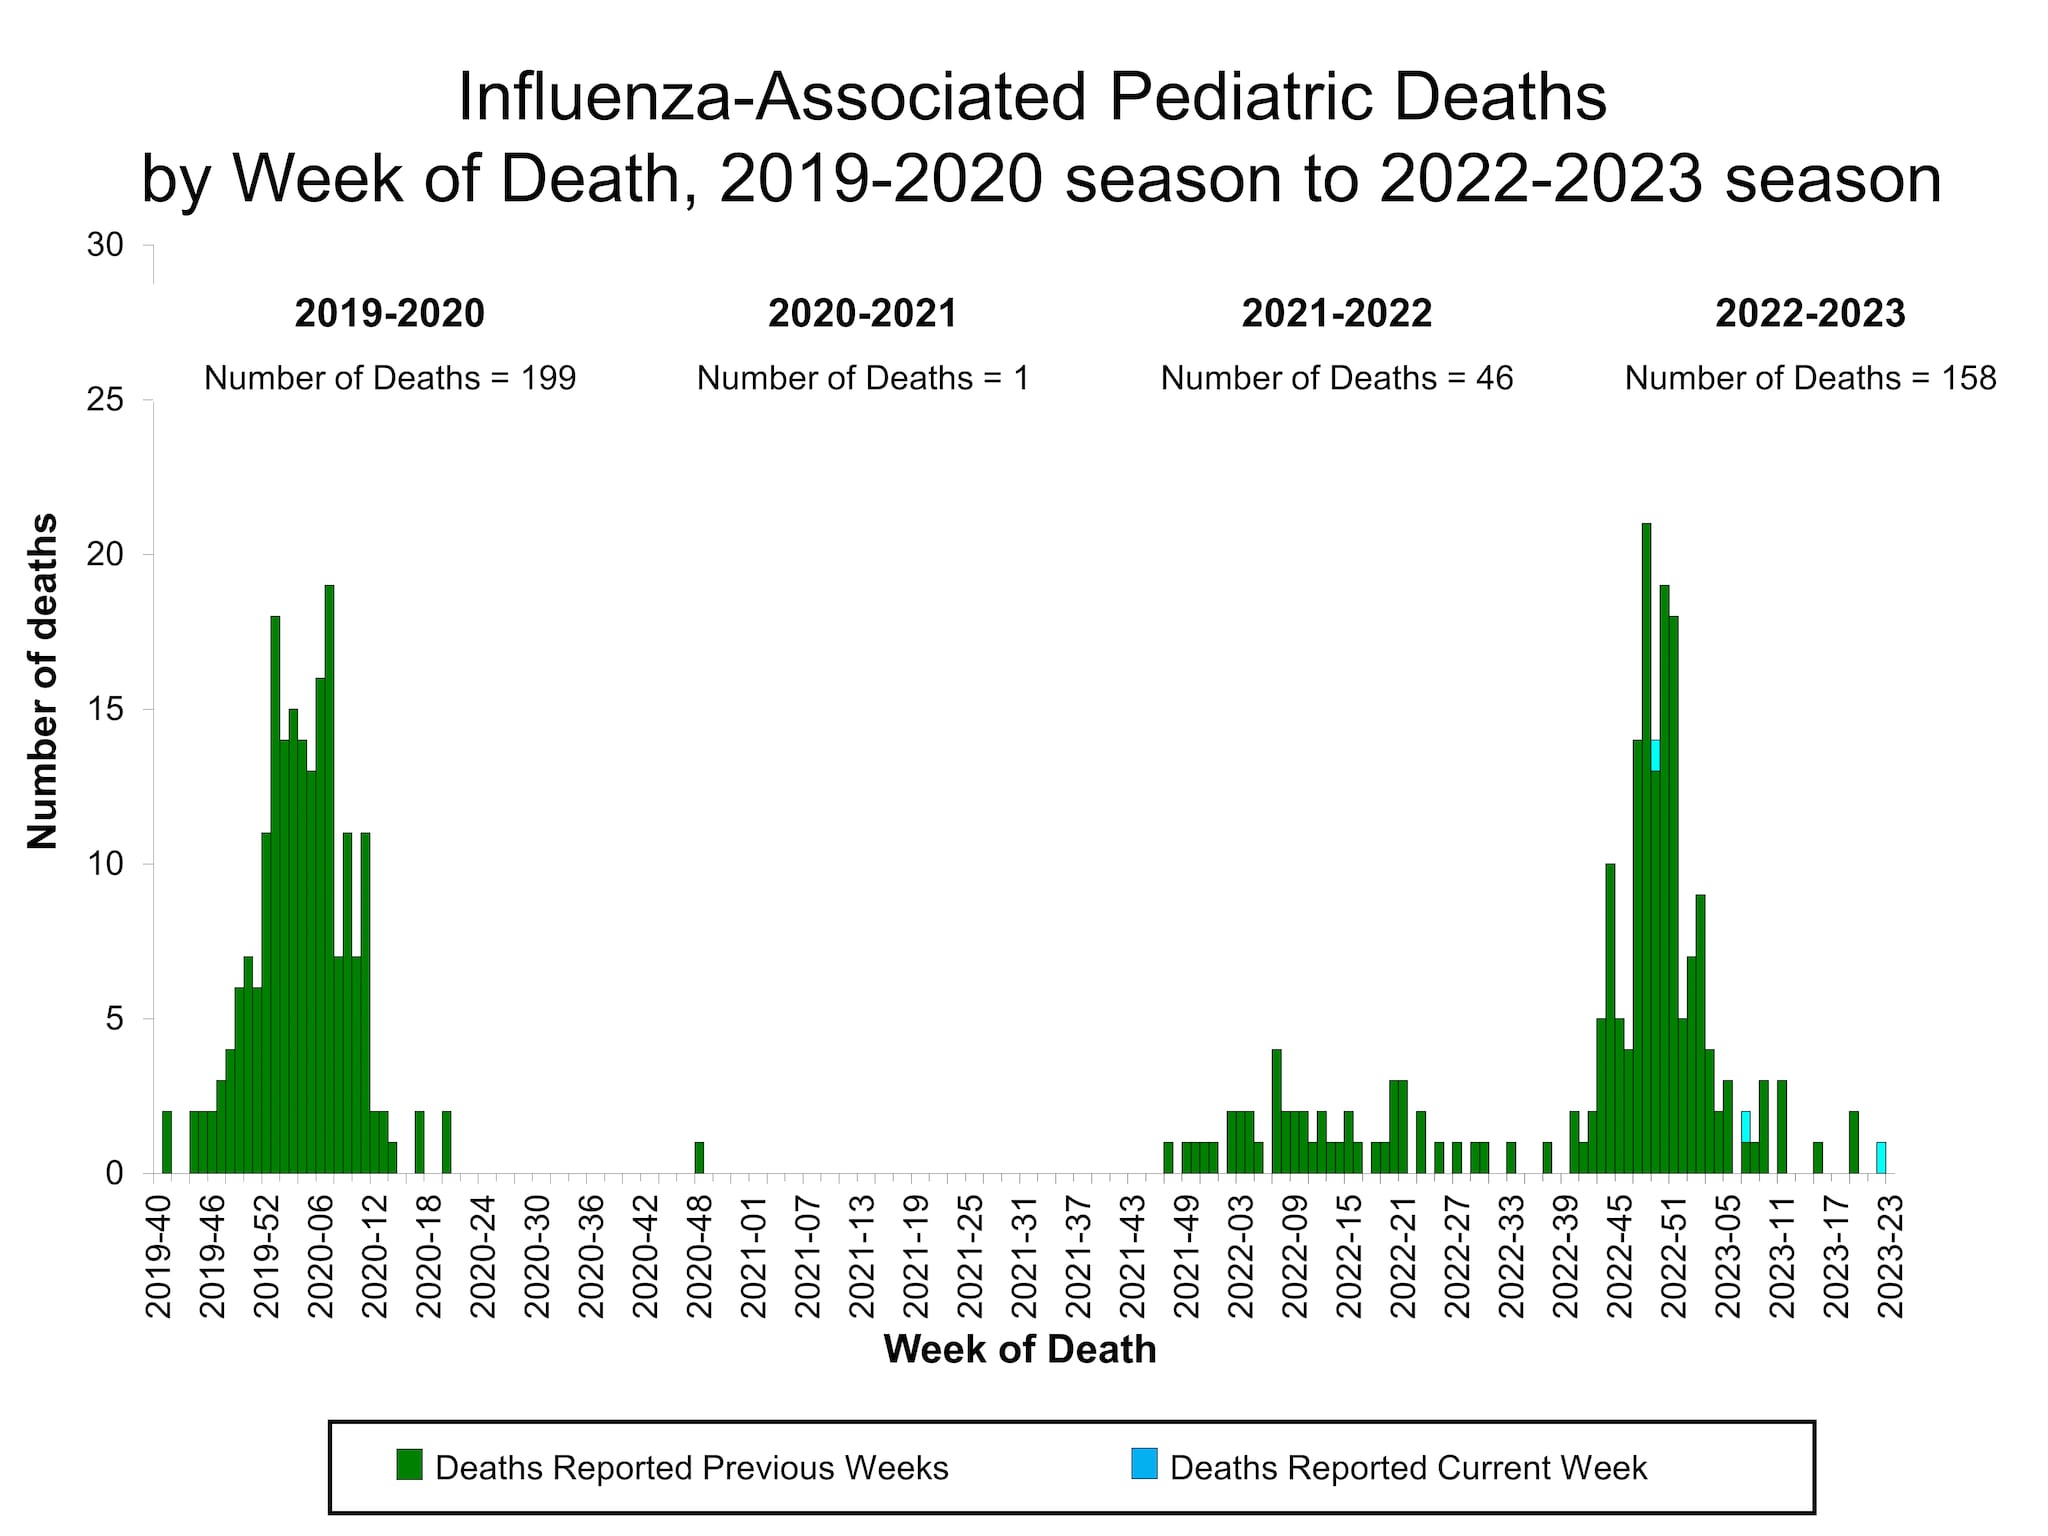 Number of Influenza-Associated Pediatric Deaths